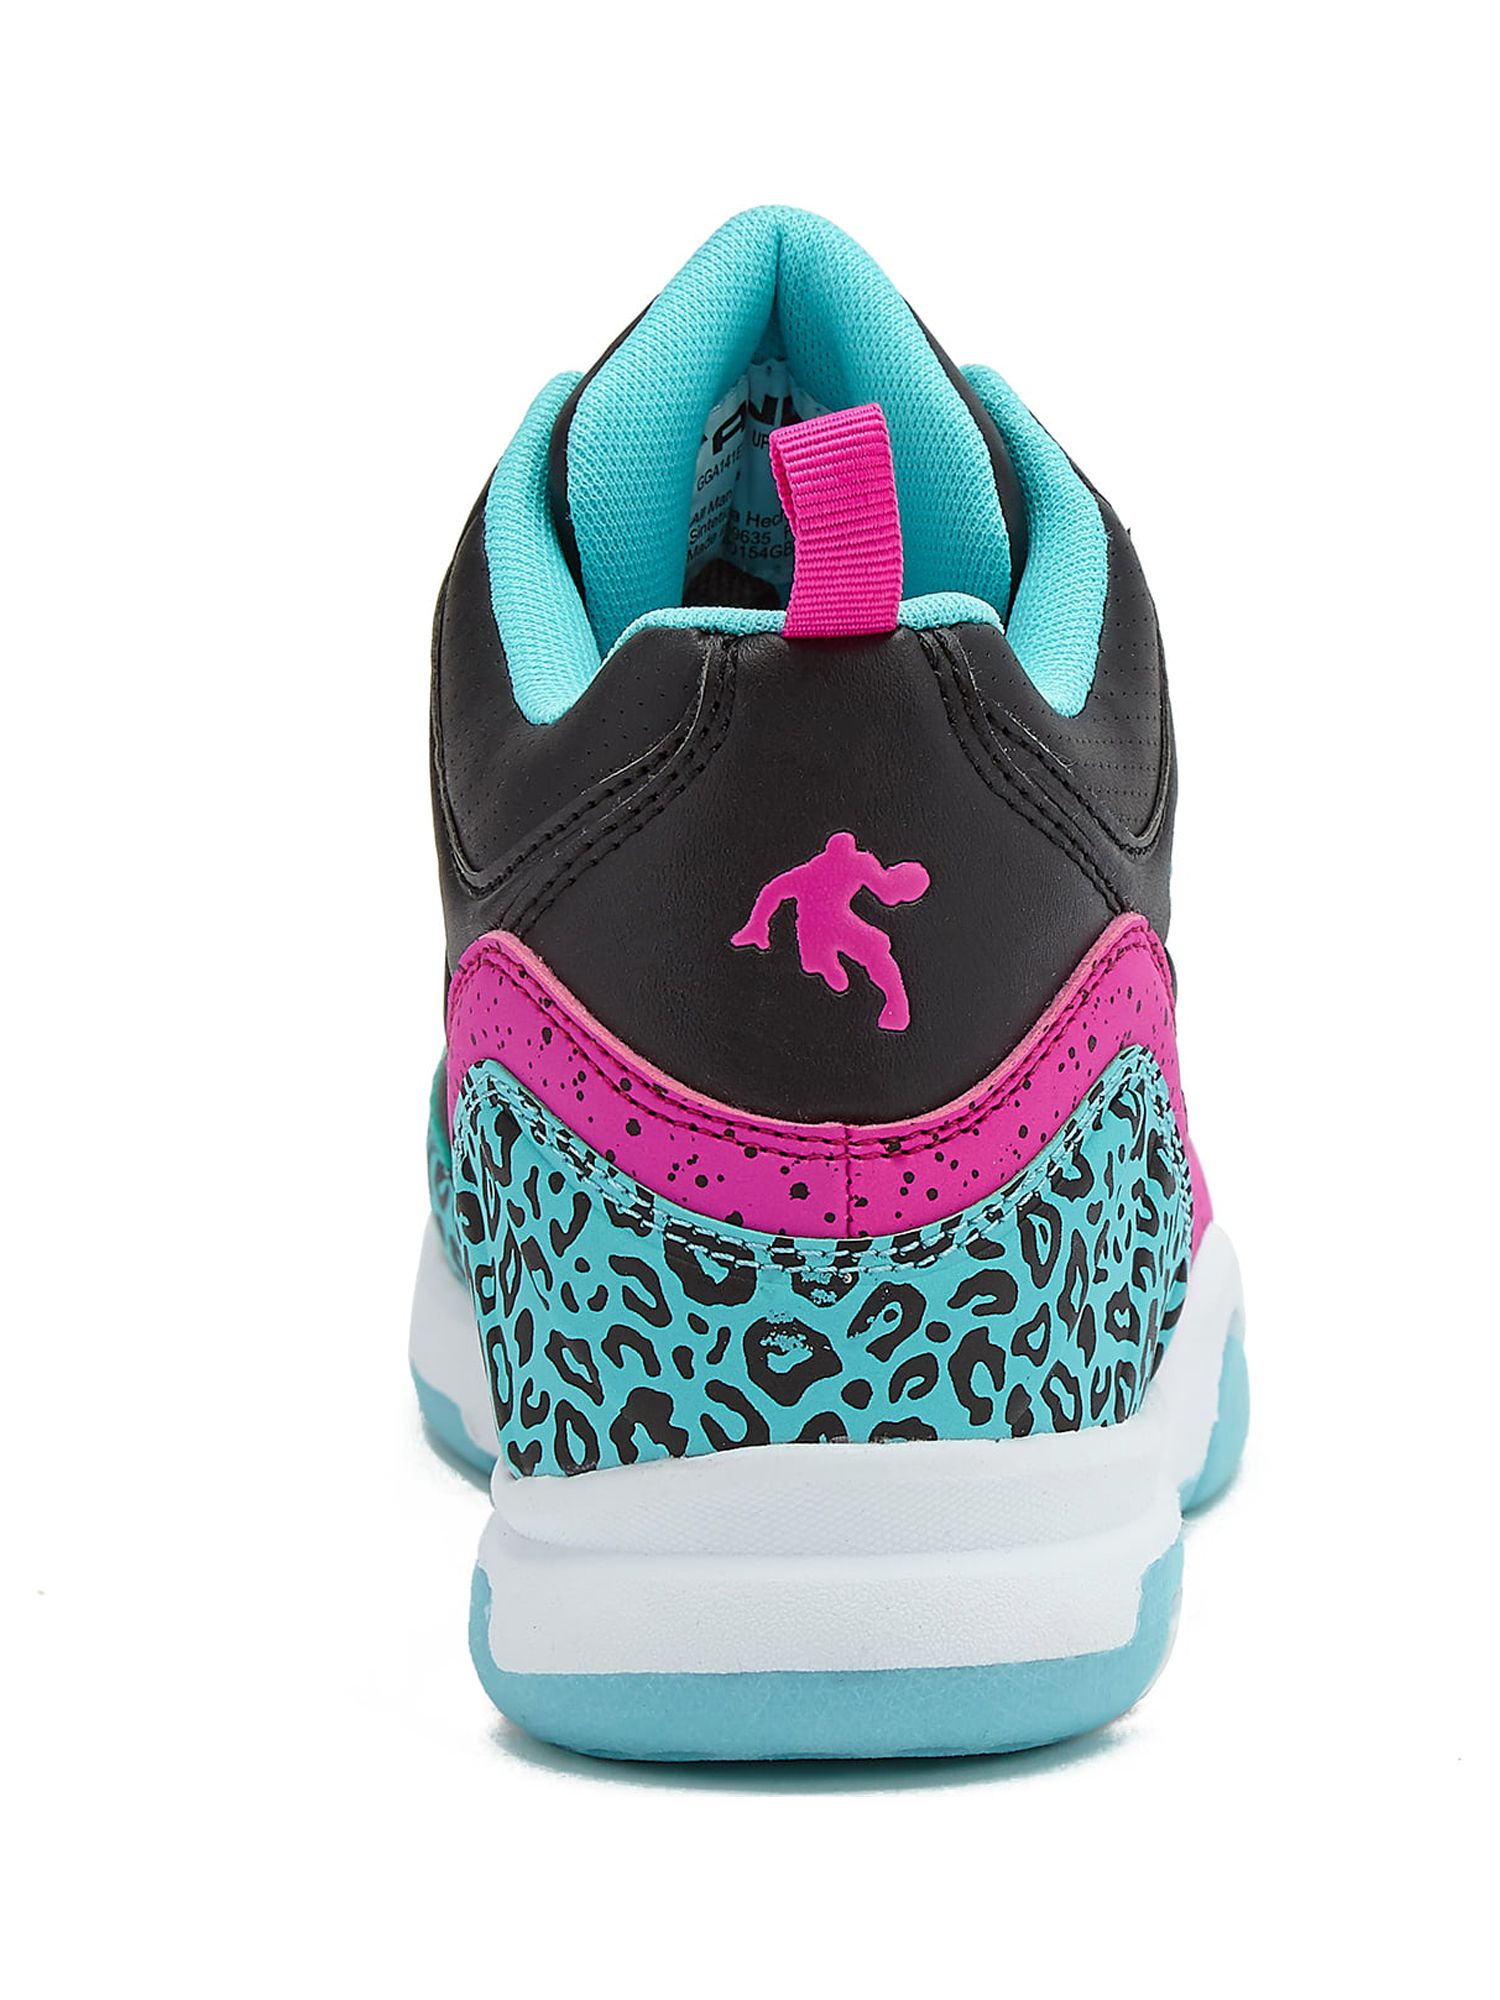 AND1 Little & Big Girl Athletic Fierce Basketball Sneaker, Sizes 13-6 - image 3 of 5